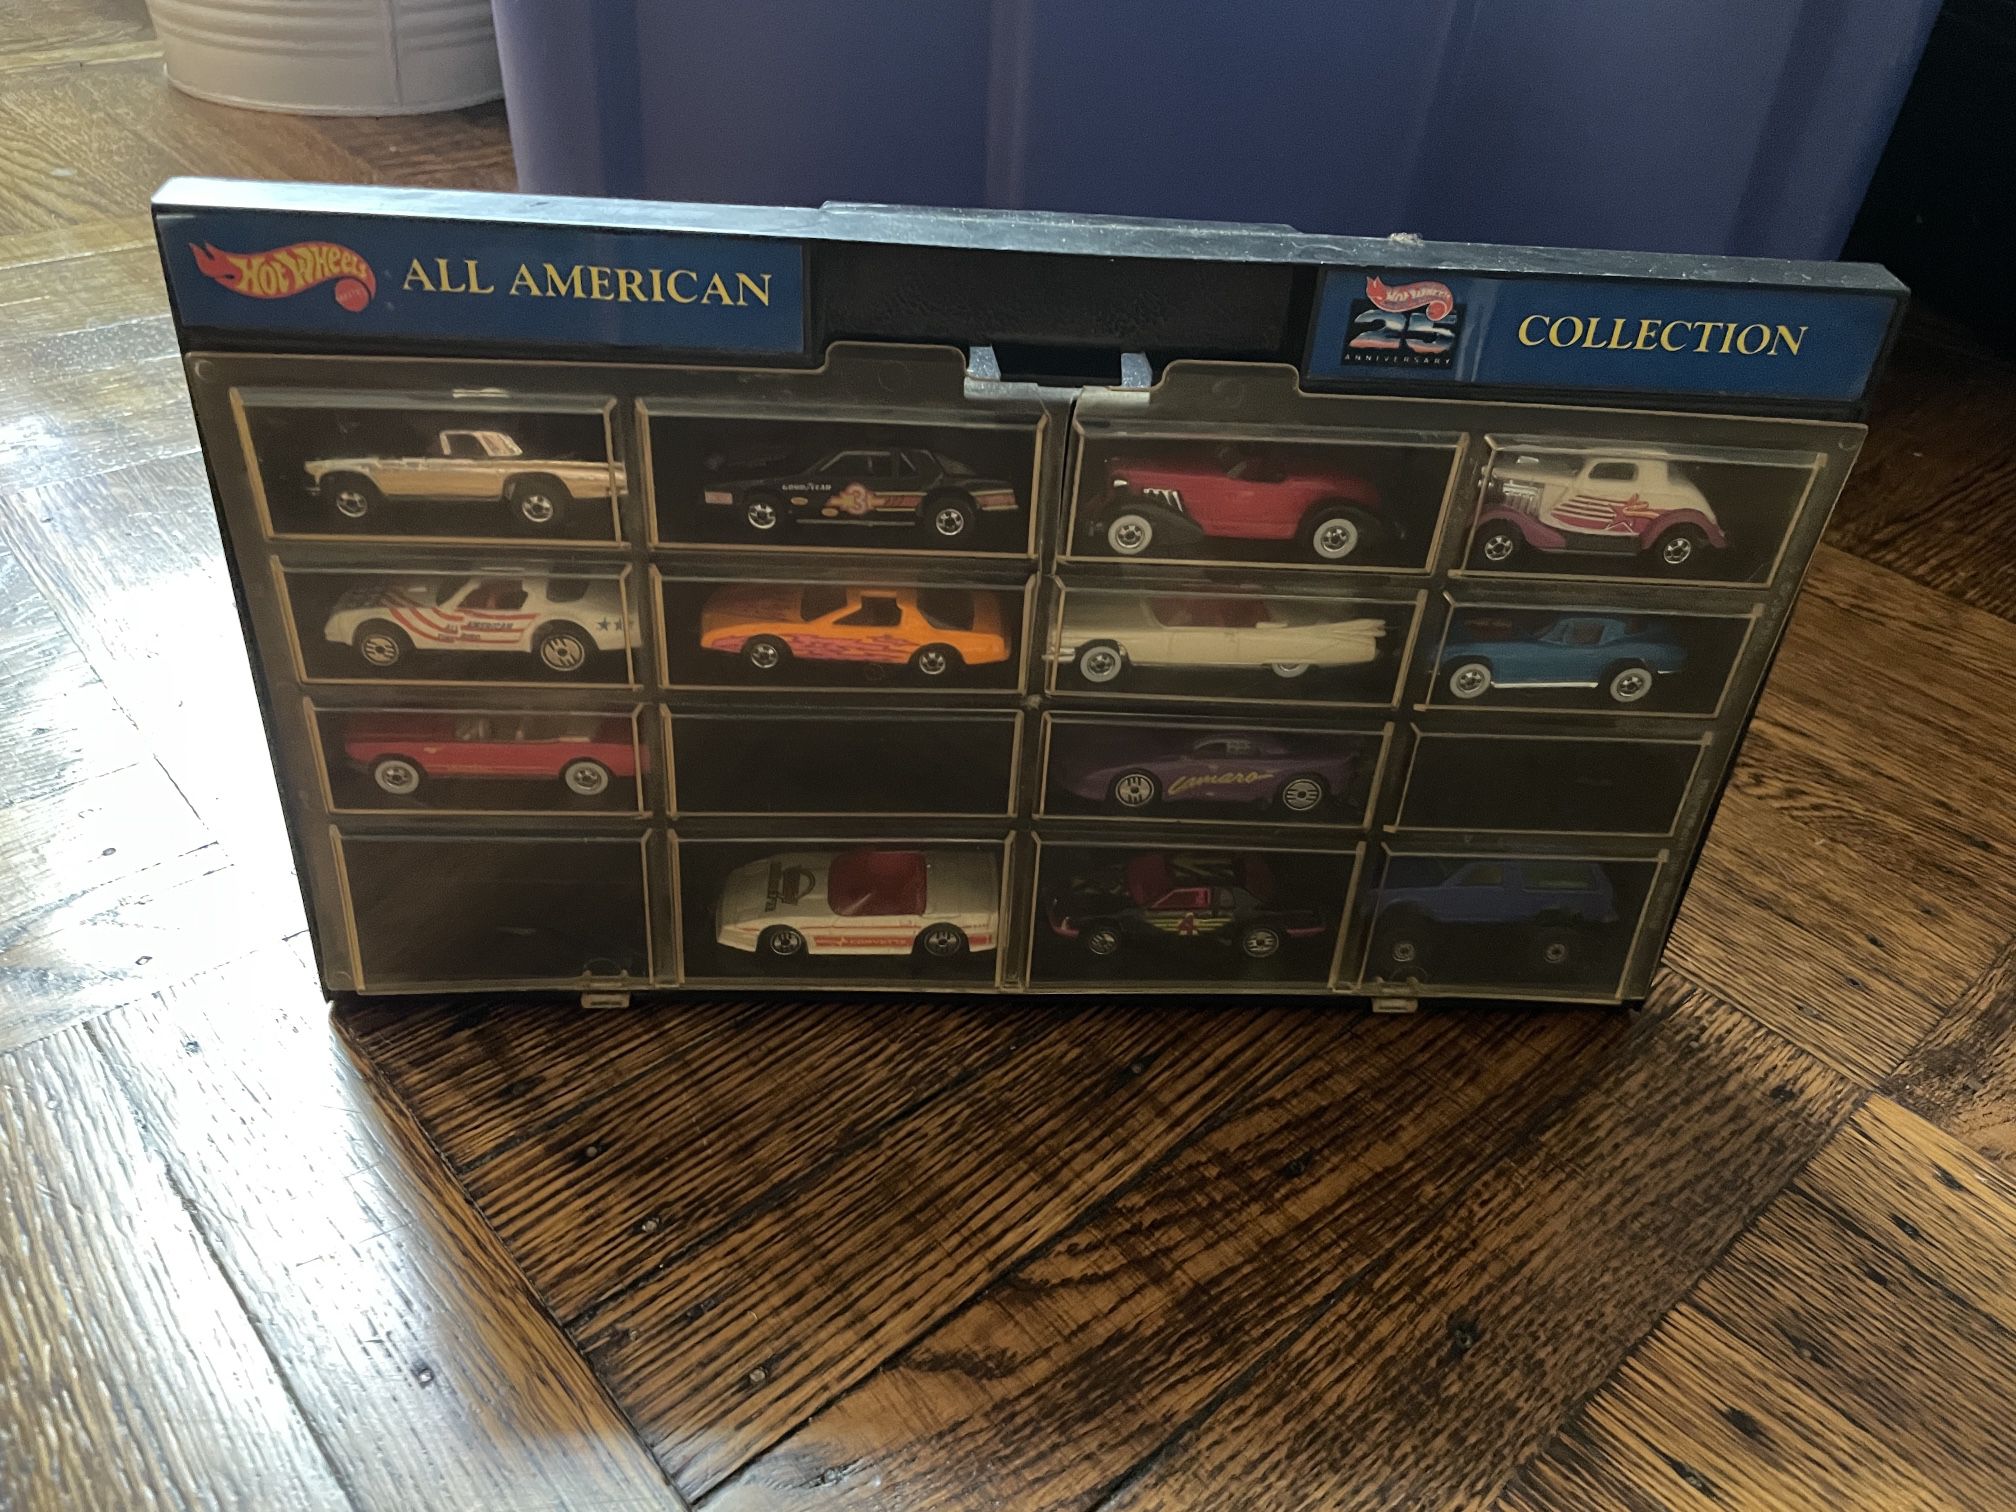 Hot wheels 25th Anniversary All American Collection